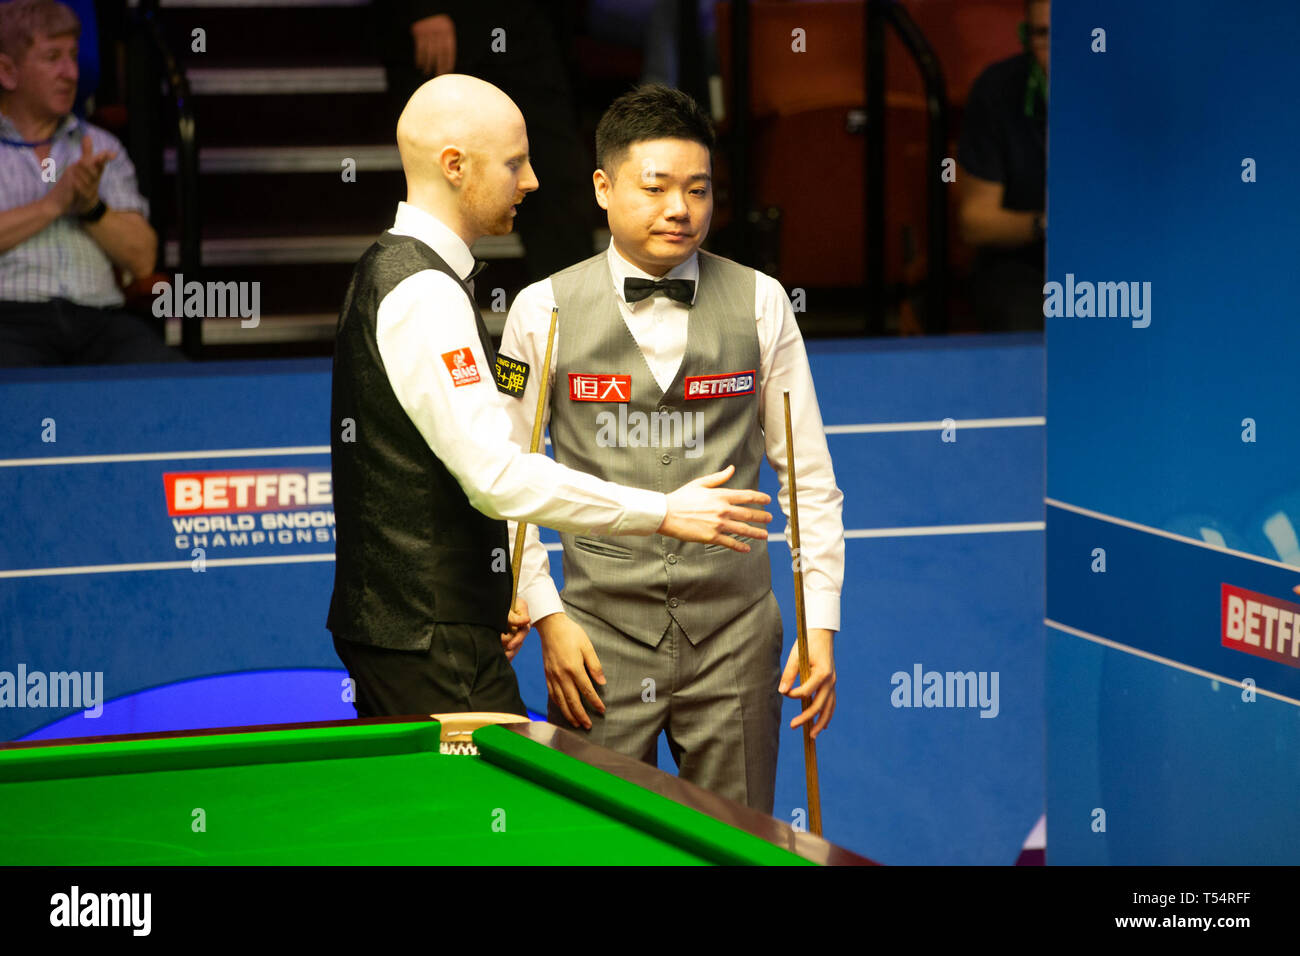 Sheffield, UK. 21st Apr 2019. Ding Junhui plays against Anthony McGill and wins (19 frames 7:10 respectively) at the Betfred World Snooker Championship at the Crucible Theatre in Sheffield, 2019 Credit: Myles Wright/ZUMA Wire/Alamy Live News Stock Photo